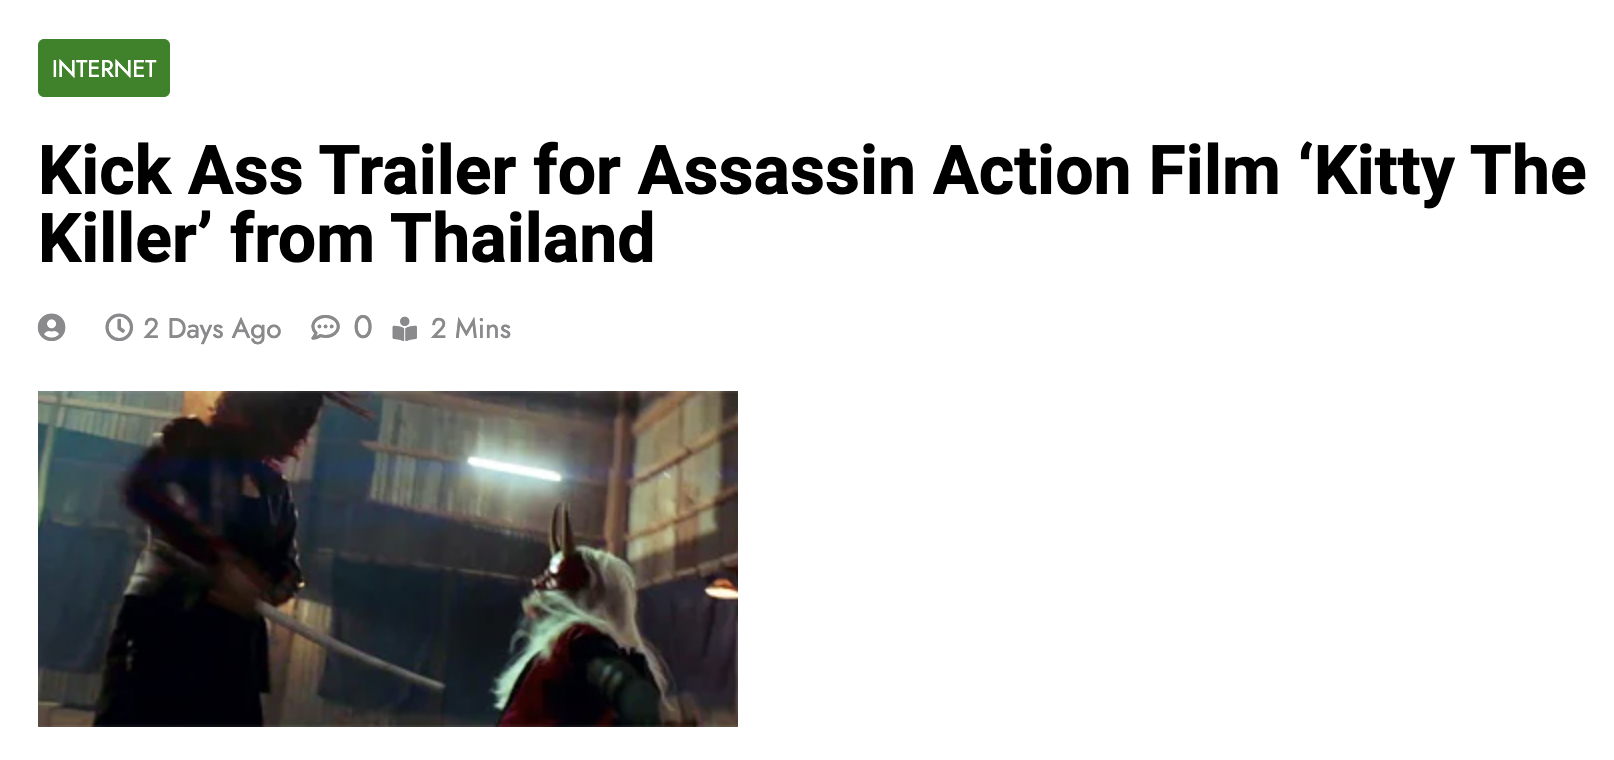 Kick Ass Trailer for Assassin Action Film ‘Kitty The Killer’ from Thailand